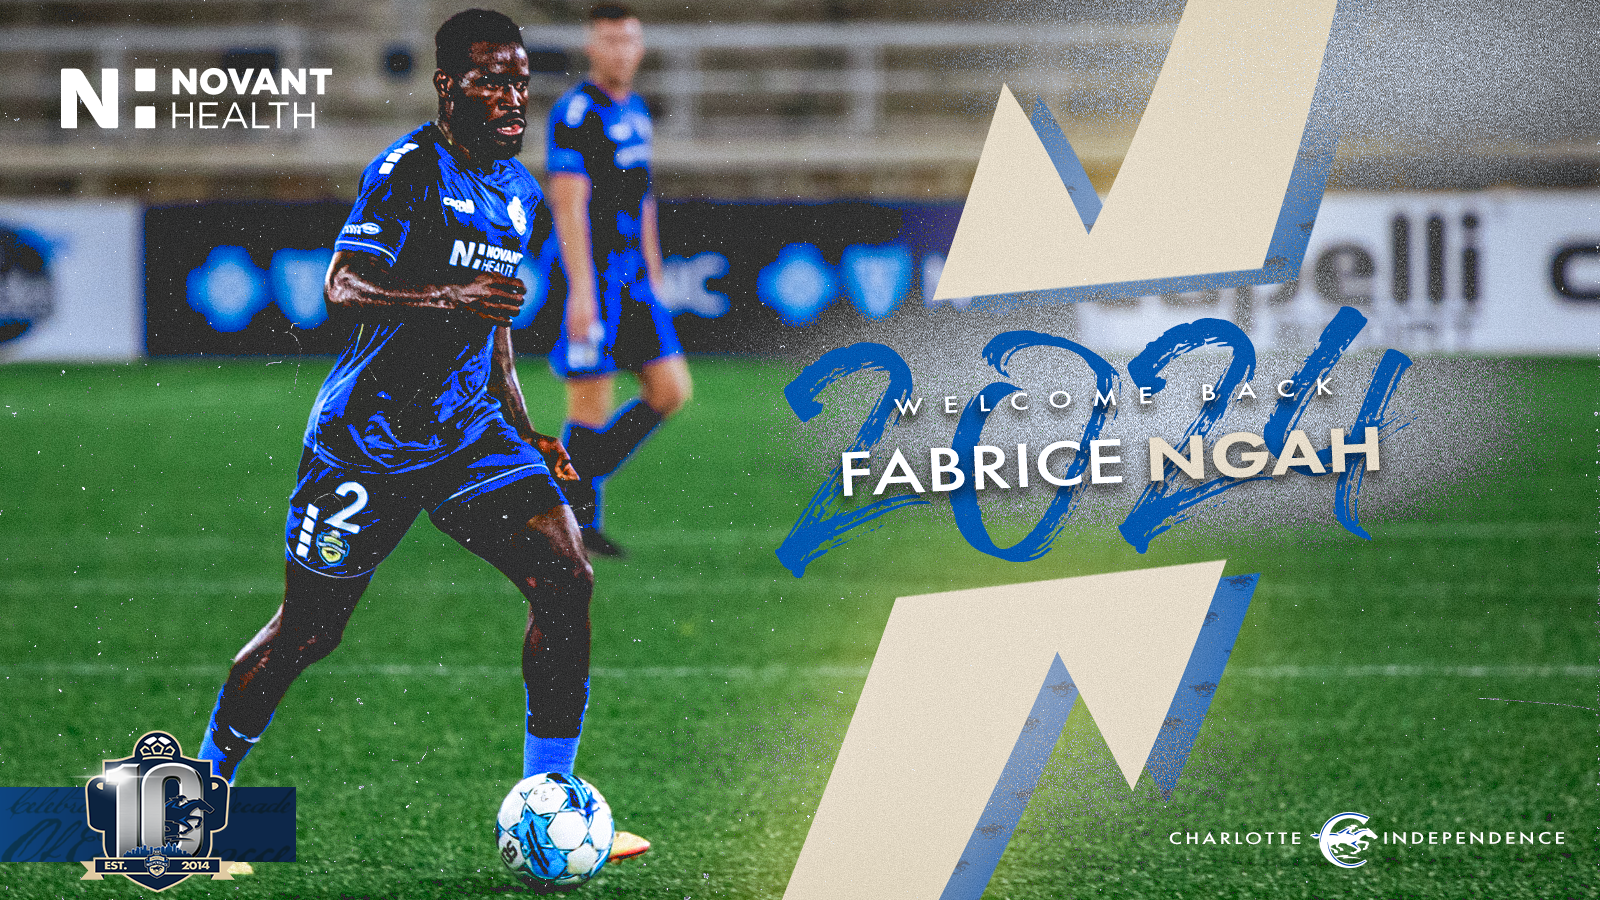 Charlotte Independence 2024 Welcome Back Graphic for Fabrice Ngah